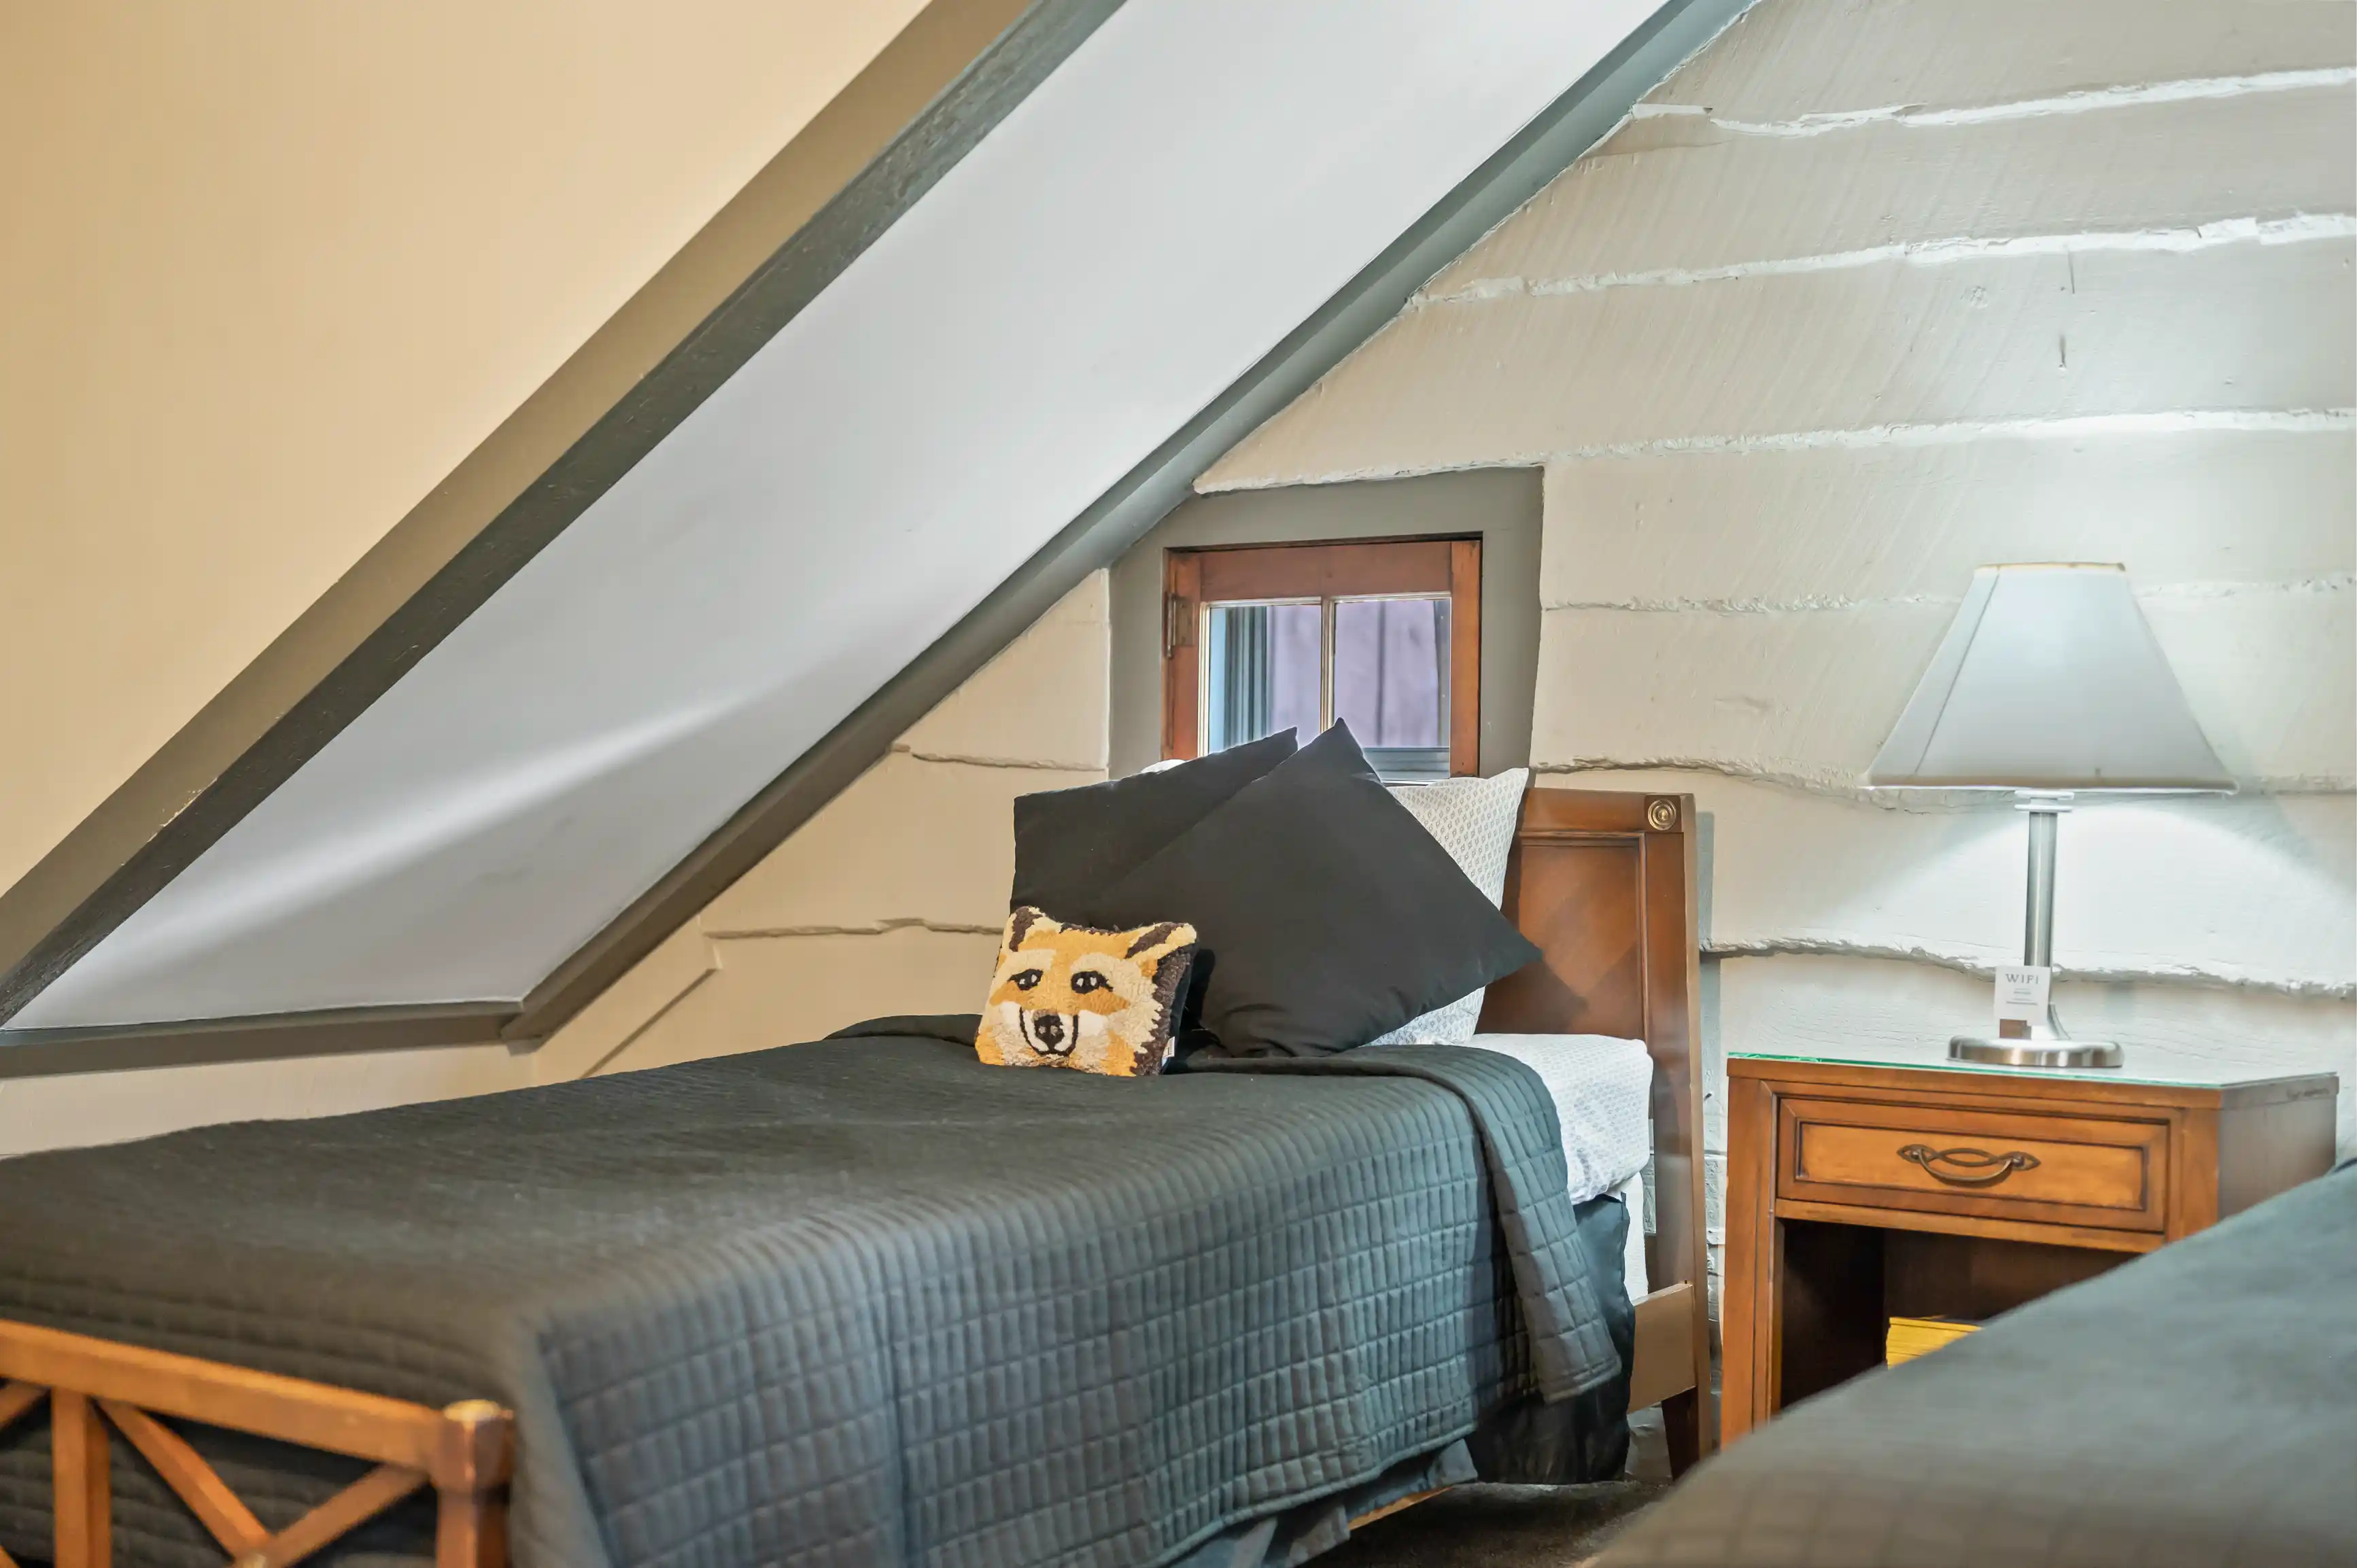 Cozy attic bedroom with a sloped ceiling, a comfortable bed with a grey blanket, and a bedside table with a lamp.